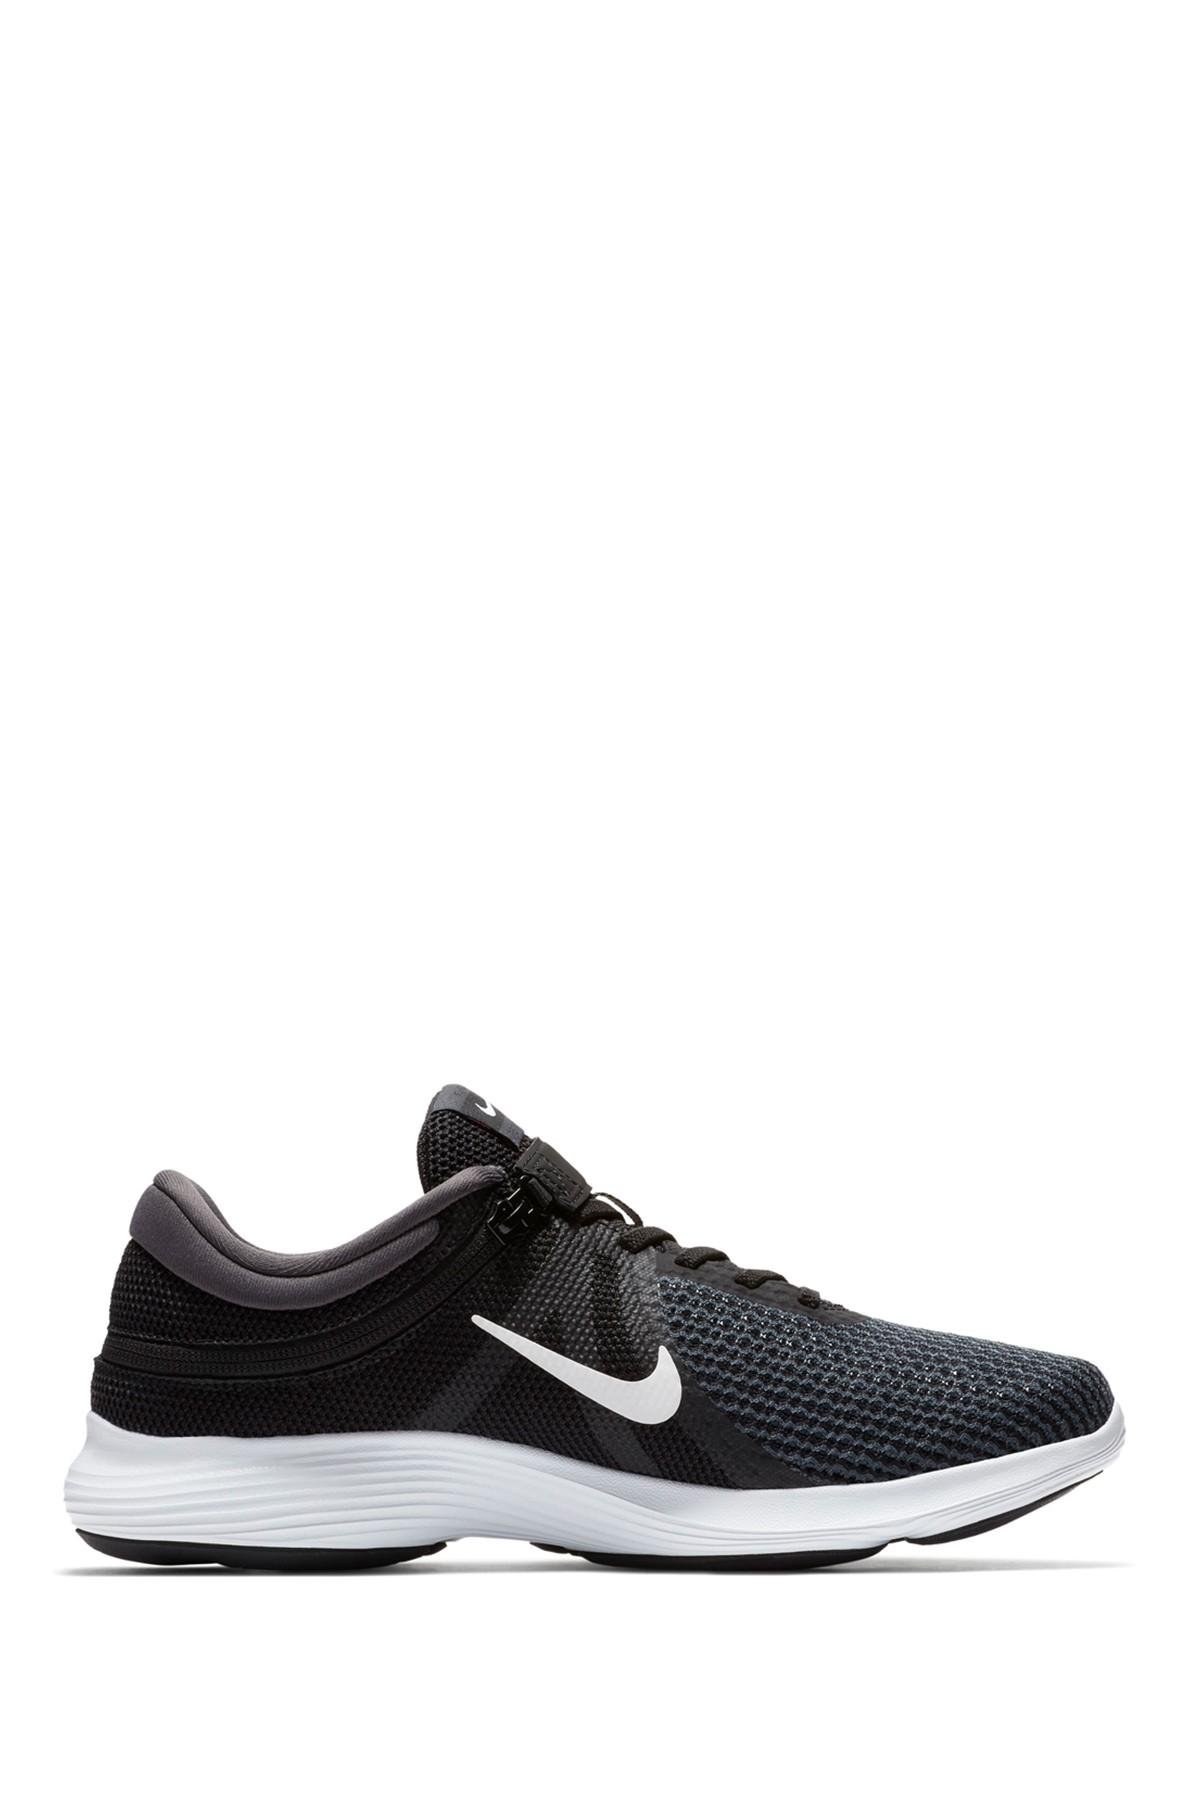 nike revolution 4 flyease extra wide